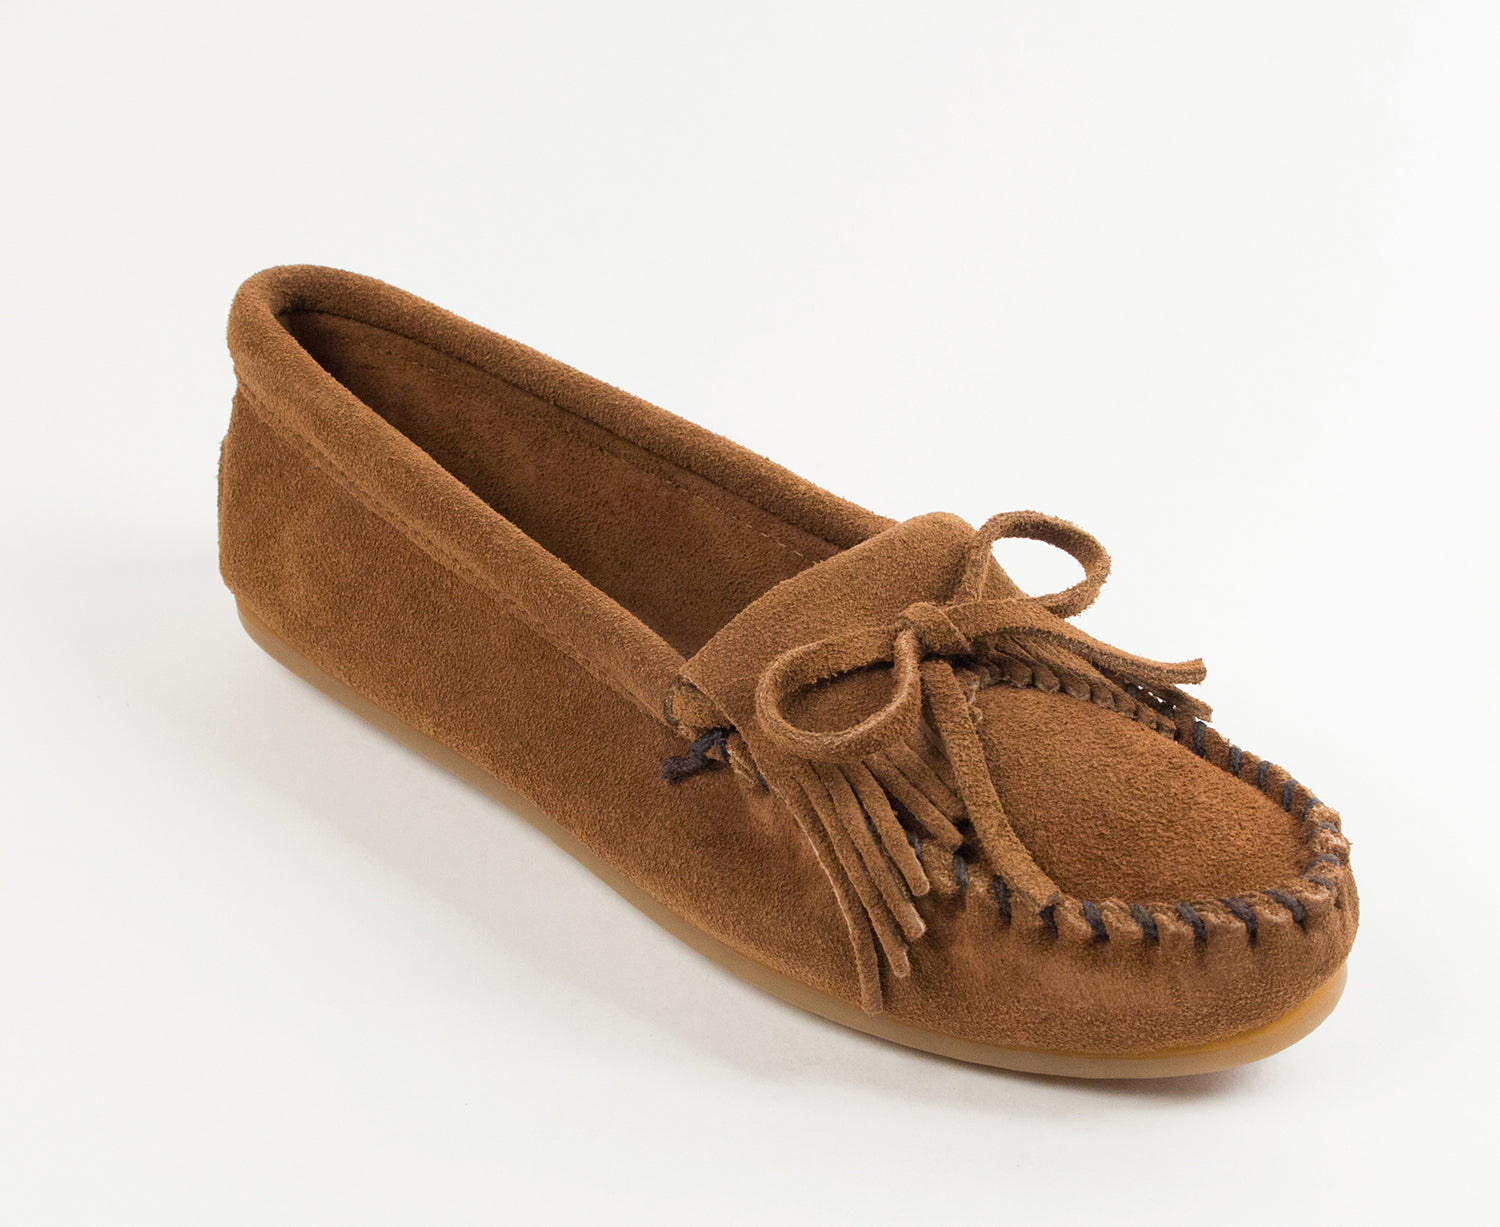 Kilty Hardsole Moccasin in Dusty Brown from 3/4 Angle View